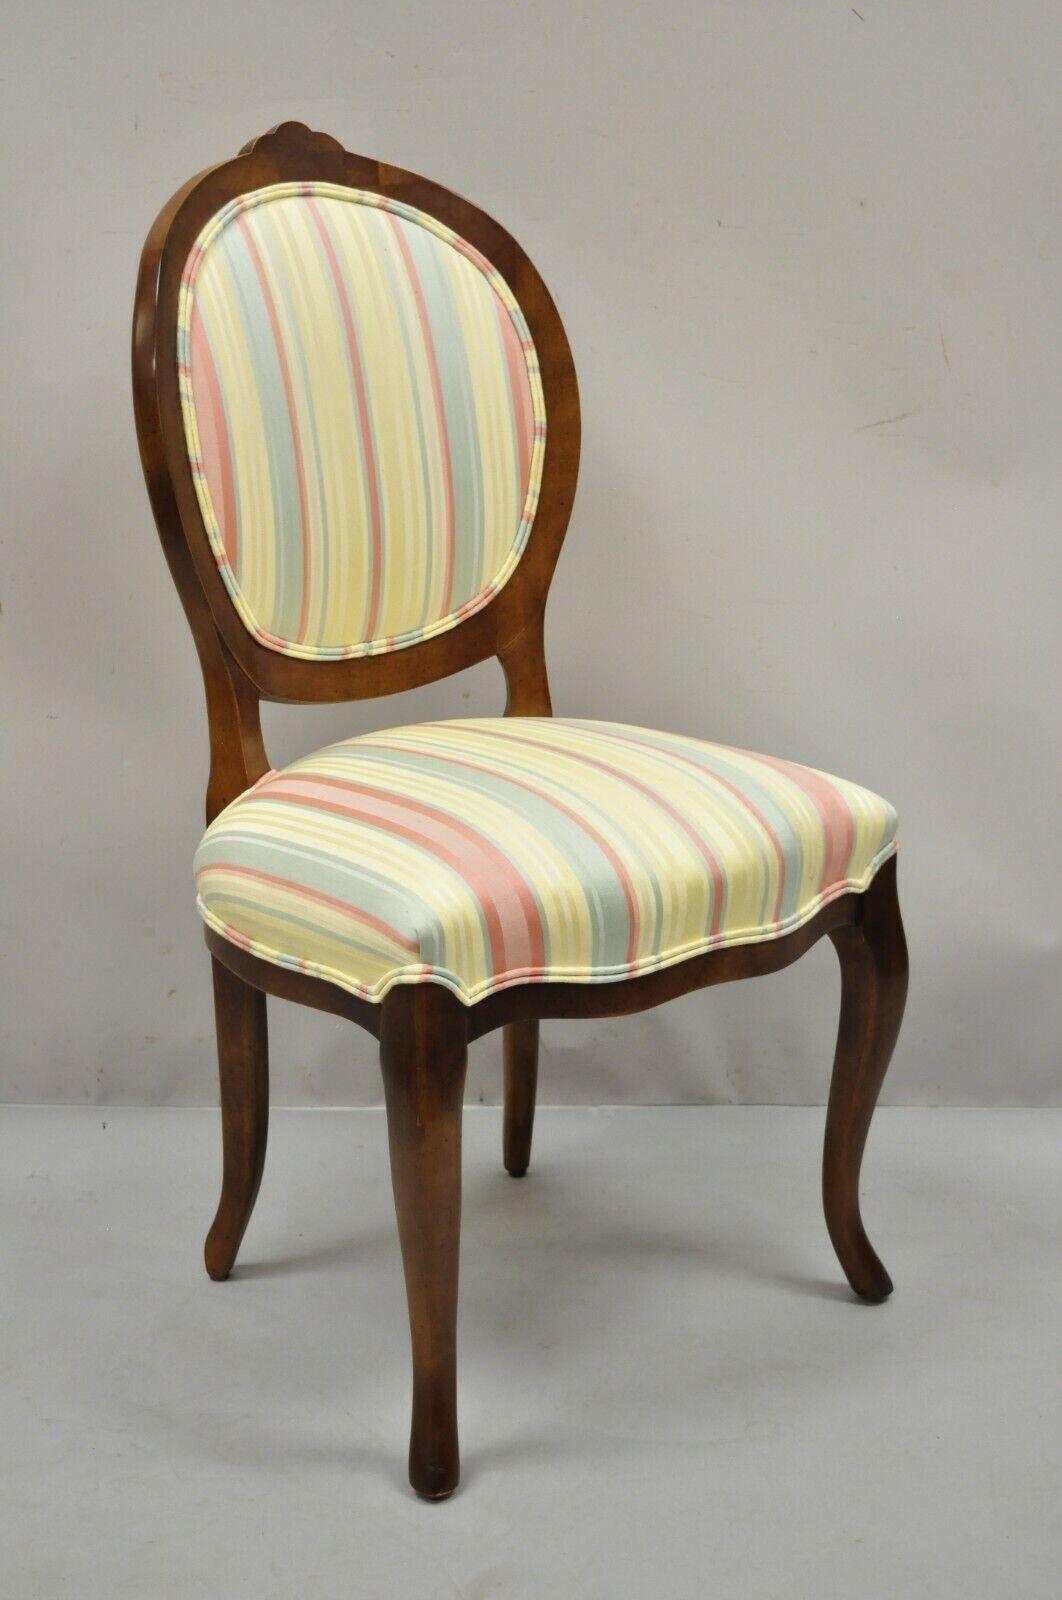 Century Chair Co Victorian Style Balloon Back Cherry Dining Side Chair. Item features gold pink, and green striped upholstery, solid wood frame, beautiful wood grain, original label, cabriole legs, quality American craftsmanship, great style and